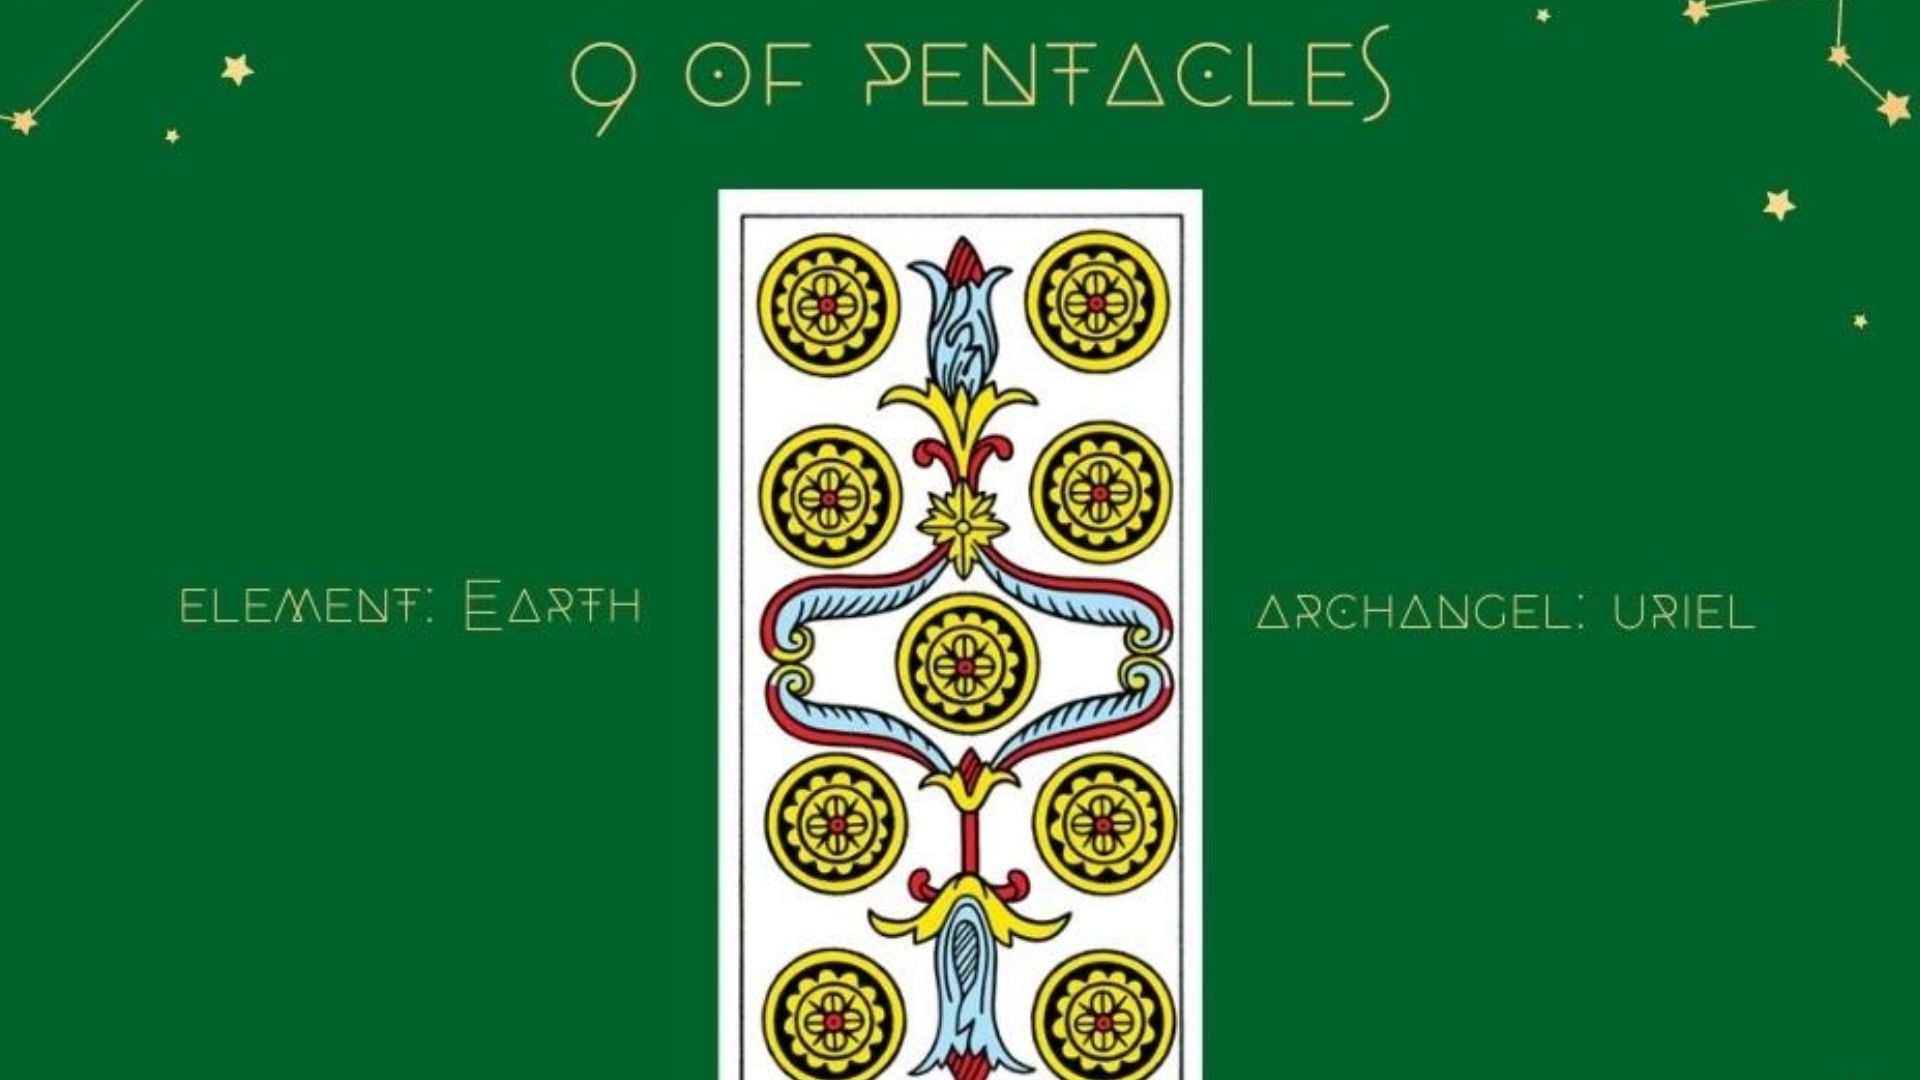 9 Of Pentacles - Financial Independence And Abundance